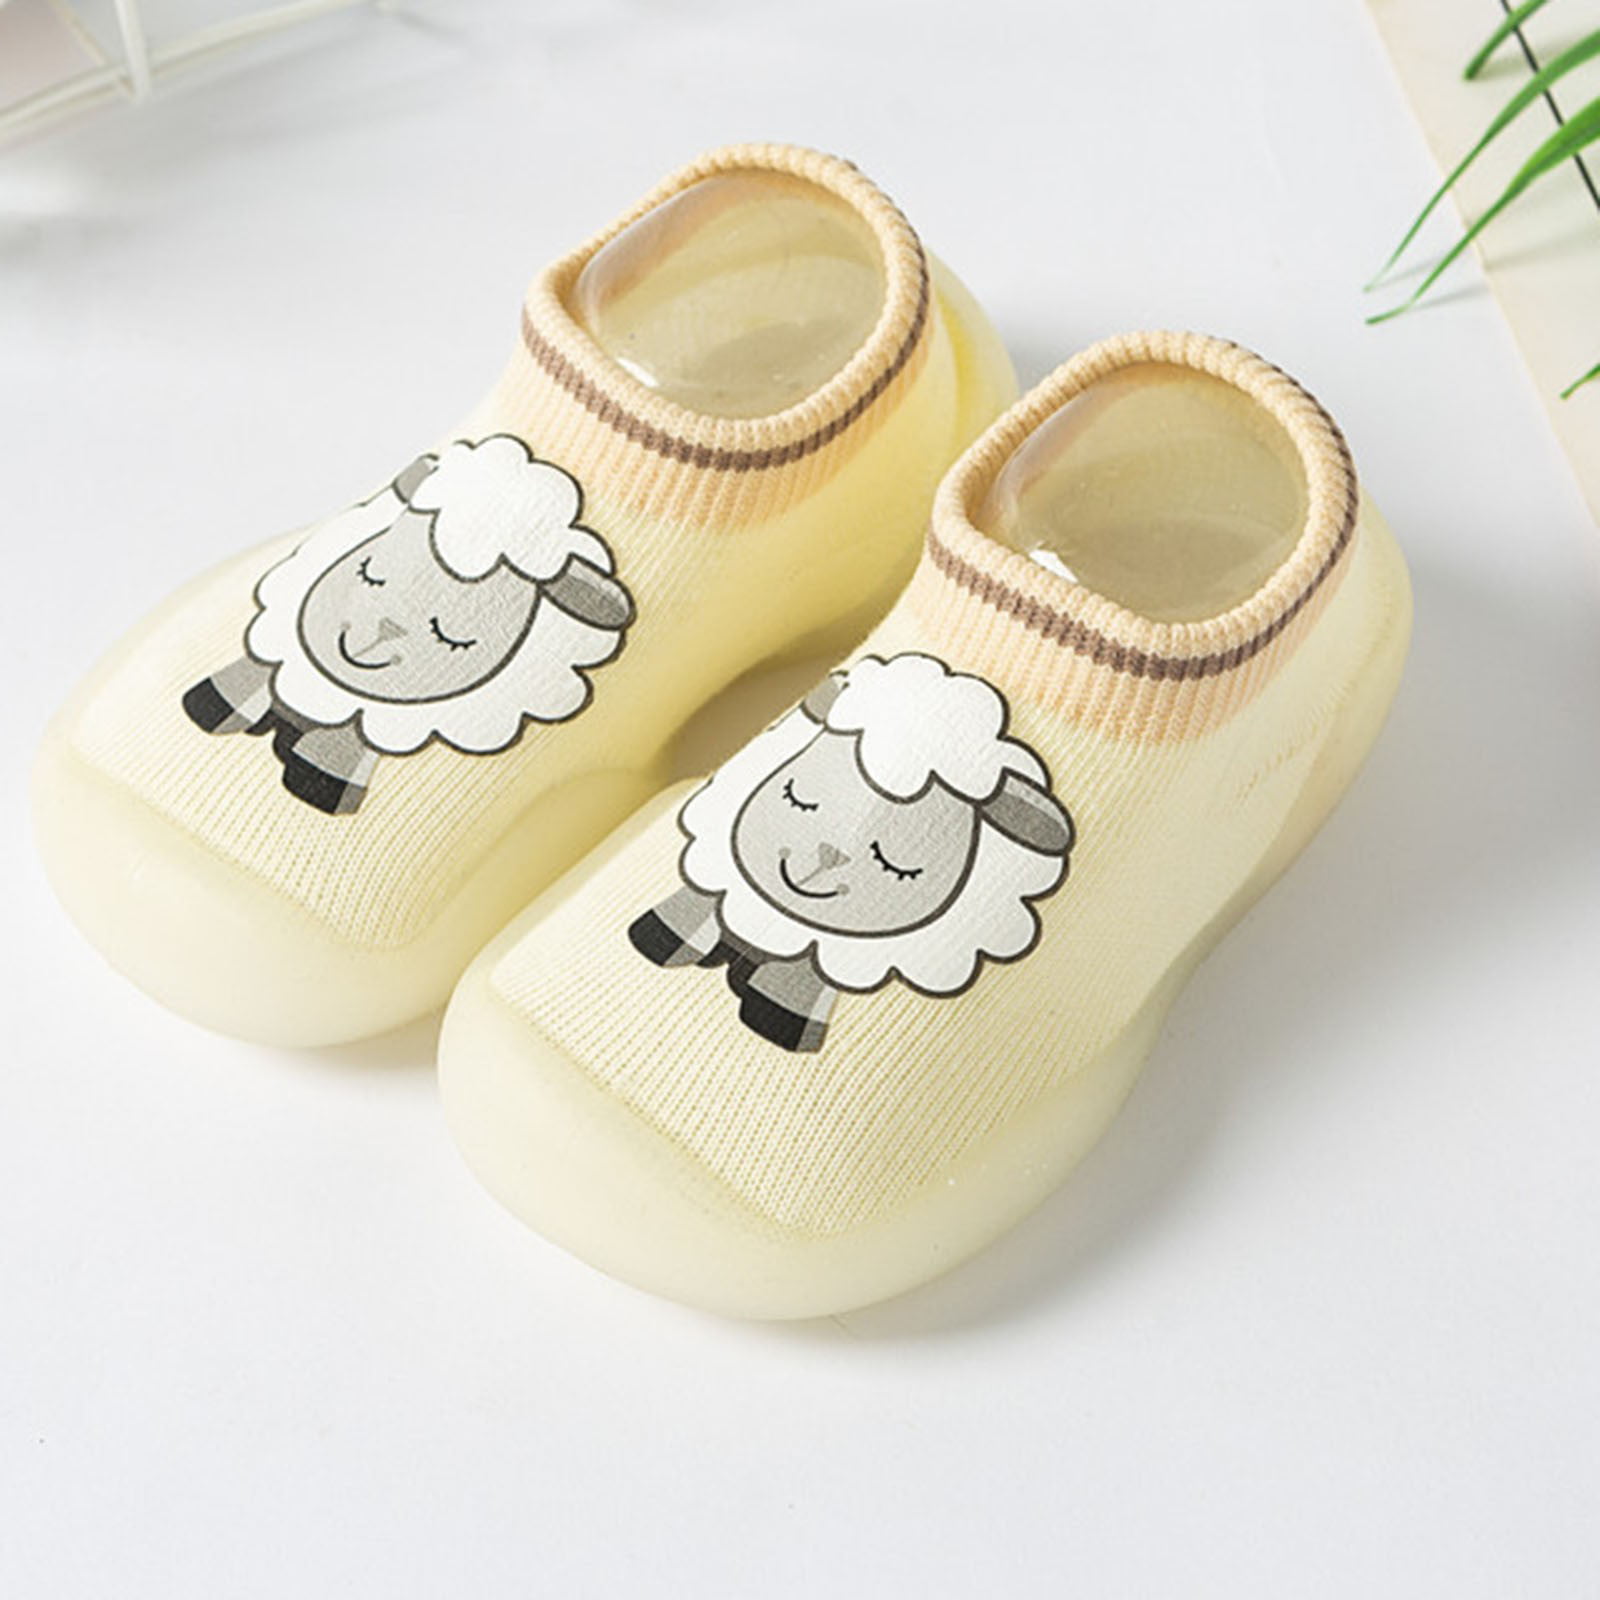 CHUOU Baby Home Slippers Cartoon Warm House Slippers For Lined Winter ...